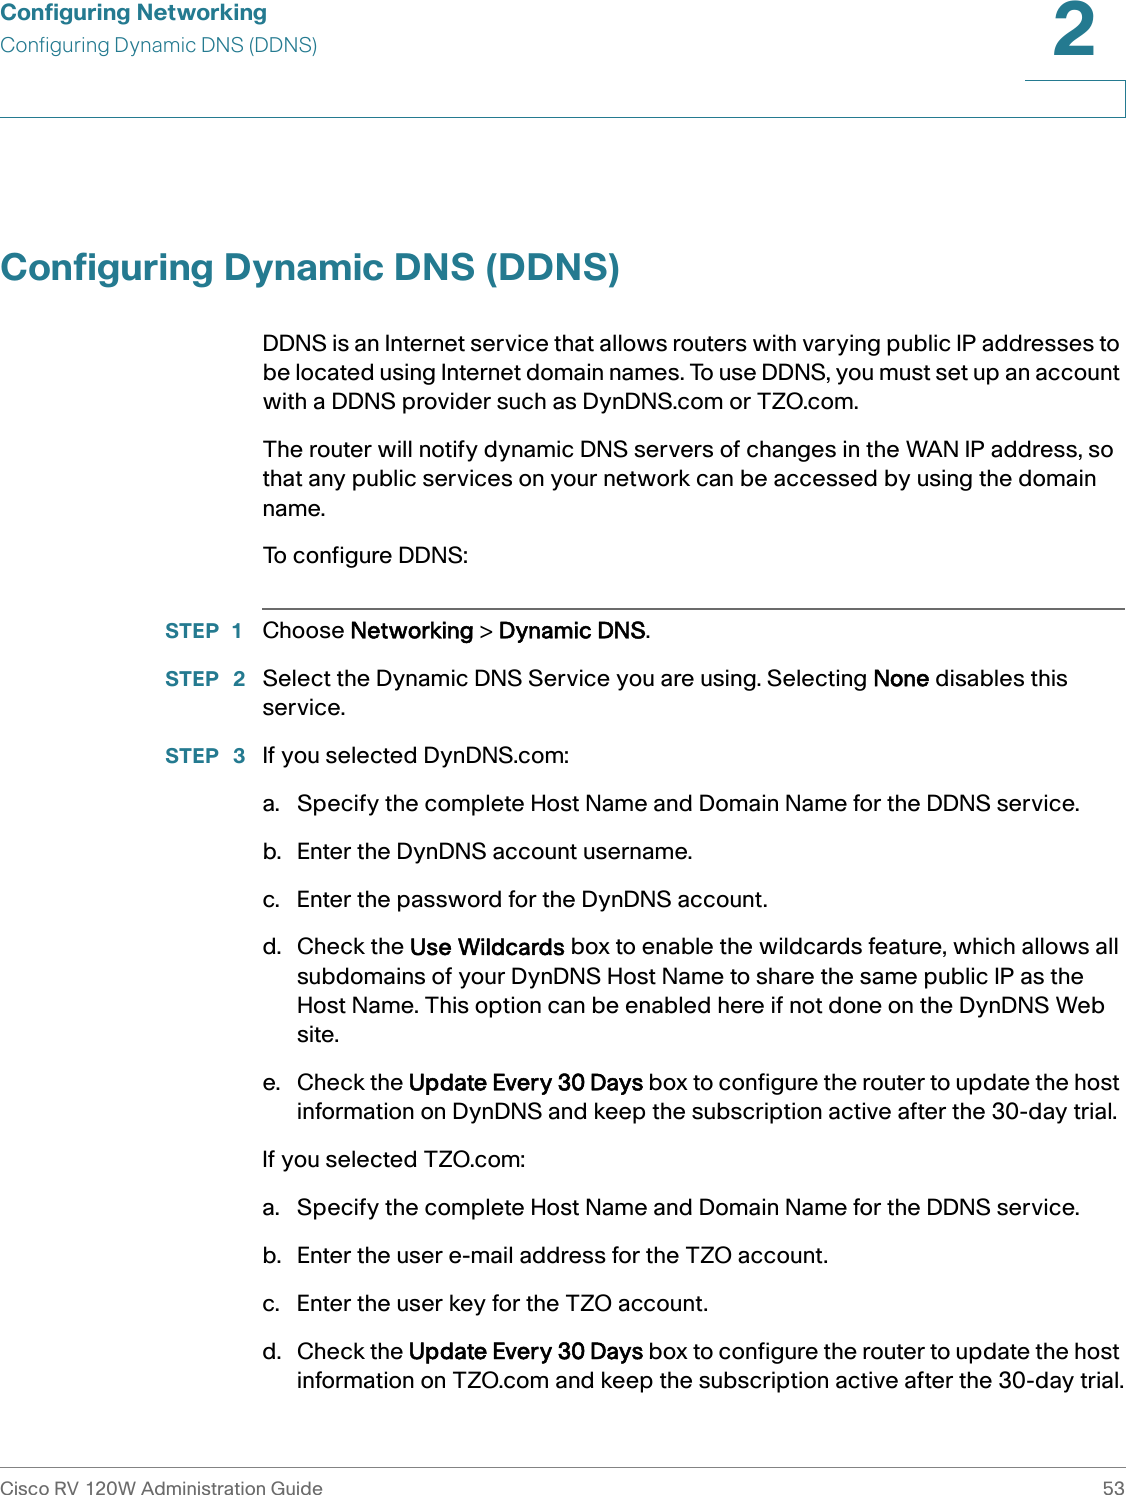 Configuring NetworkingConfiguring Dynamic DNS (DDNS)Cisco RV 120W Administration Guide 532 Configuring Dynamic DNS (DDNS)DDNS is an Internet service that allows routers with varying public IP addresses to be located using Internet domain names. To use DDNS, you must set up an account with a DDNS provider such as DynDNS.com or TZO.com. The router will notify dynamic DNS servers of changes in the WAN IP address, so that any public services on your network can be accessed by using the domain name.To configure DDNS:STEP 1 Choose Networking &gt; Dynamic DNS.STEP  2 Select the Dynamic DNS Service you are using. Selecting None disables this service.STEP  3 If you selected DynDNS.com:a. Specify the complete Host Name and Domain Name for the DDNS service. b. Enter the DynDNS account username. c. Enter the password for the DynDNS account.d. Check the Use Wildcards box to enable the wildcards feature, which allows all subdomains of your DynDNS Host Name to share the same public IP as the Host Name. This option can be enabled here if not done on the DynDNS Web site. e. Check the Update Every 30 Days box to configure the router to update the host information on DynDNS and keep the subscription active after the 30-day trial.If you selected TZO.com:a. Specify the complete Host Name and Domain Name for the DDNS service. b. Enter the user e-mail address for the TZO account. c. Enter the user key for the TZO account.d. Check the Update Every 30 Days box to configure the router to update the host information on TZO.com and keep the subscription active after the 30-day trial.